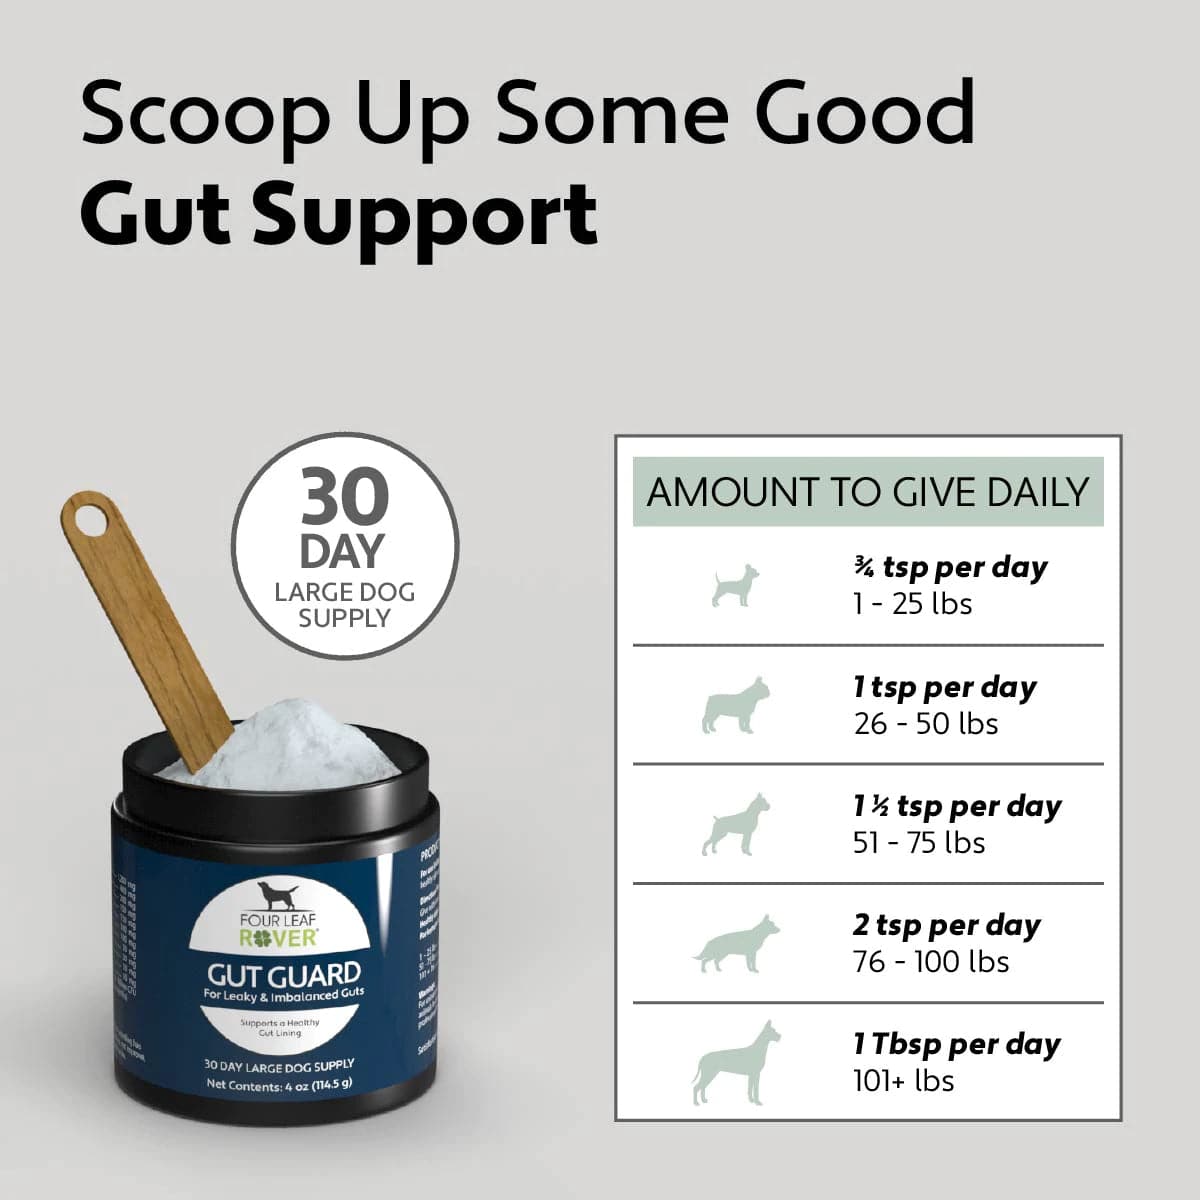 Gut Guard - For Dogs With Irritated, Leaky Guts